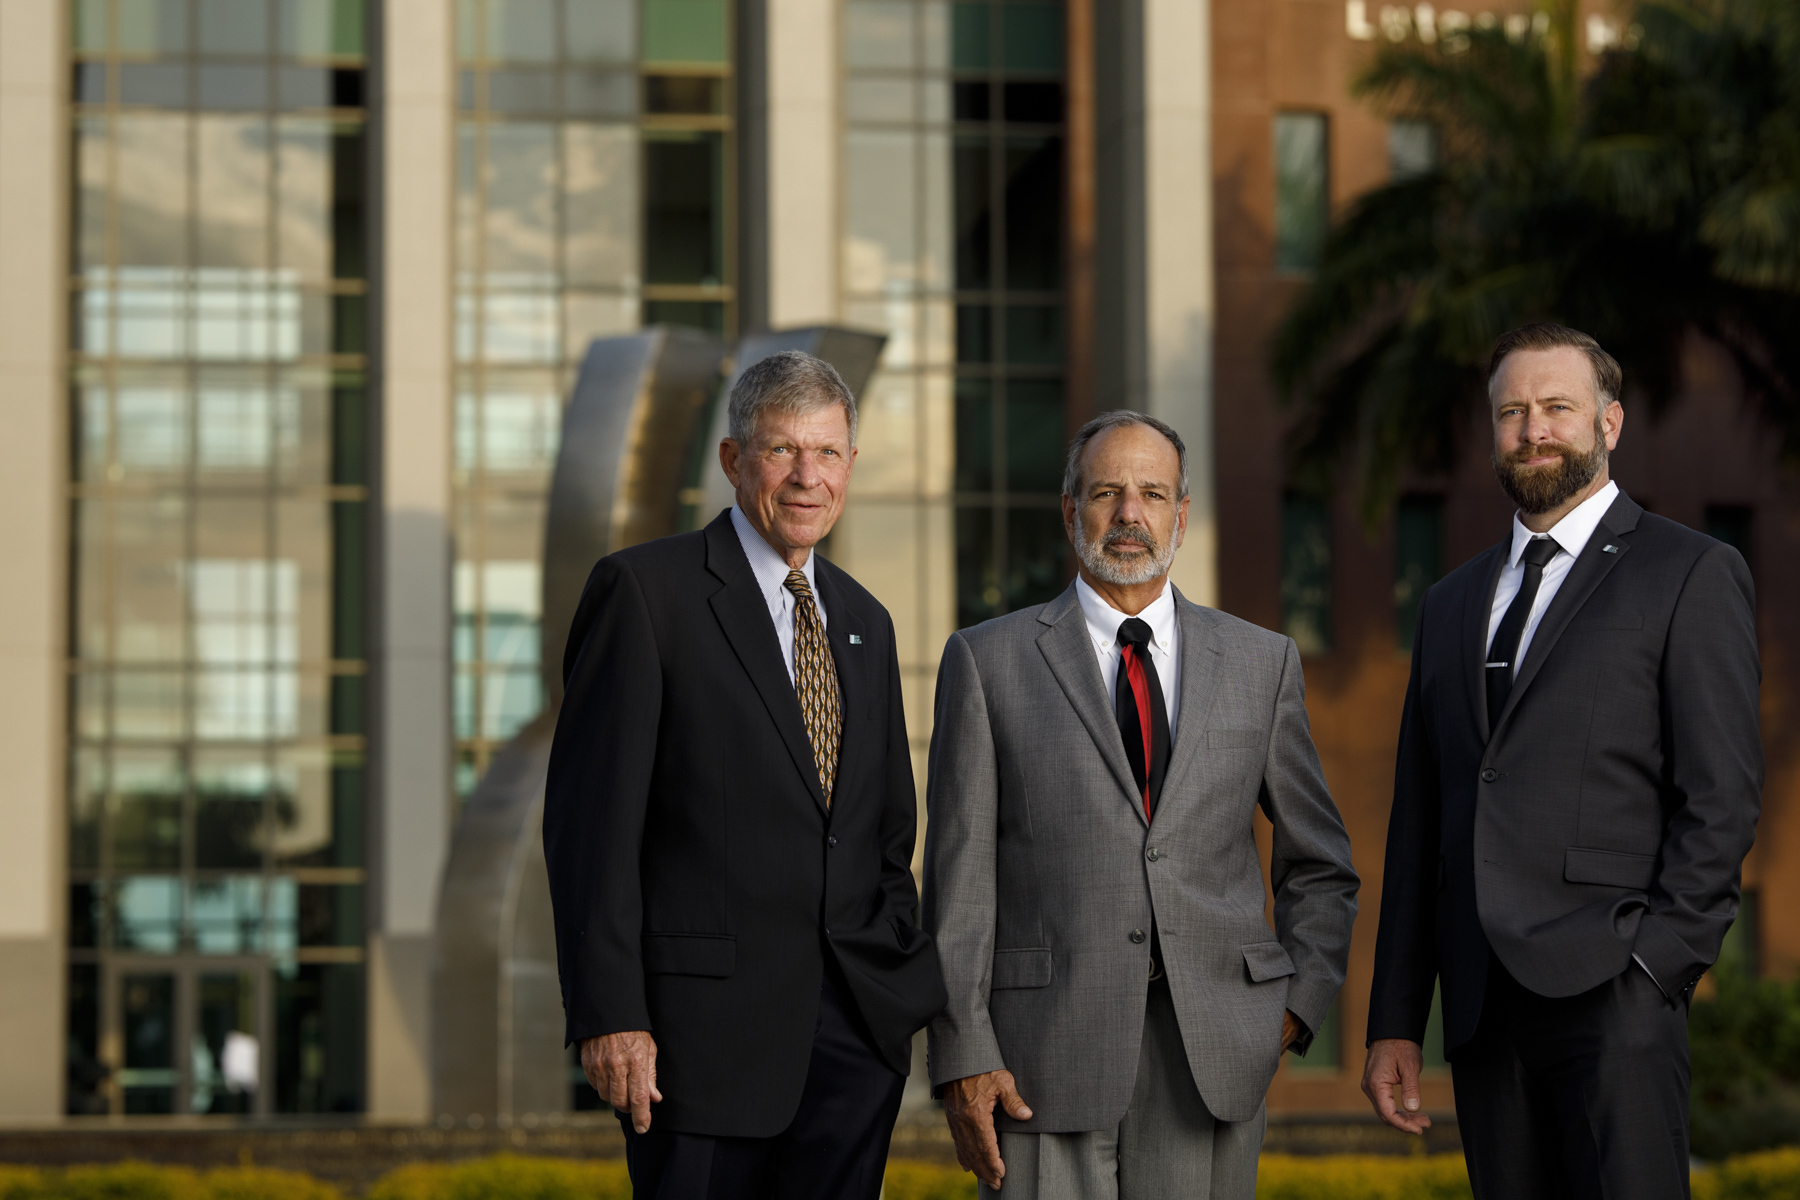 Courtesy. Three separate leaders, Steve Shimp, Dave Dale and now Matthew Zwack, have overseen Florida operations of Owen-Ames-Kimball going back to 1982. Projects include work on the Lutgert College of Business at FGCU.